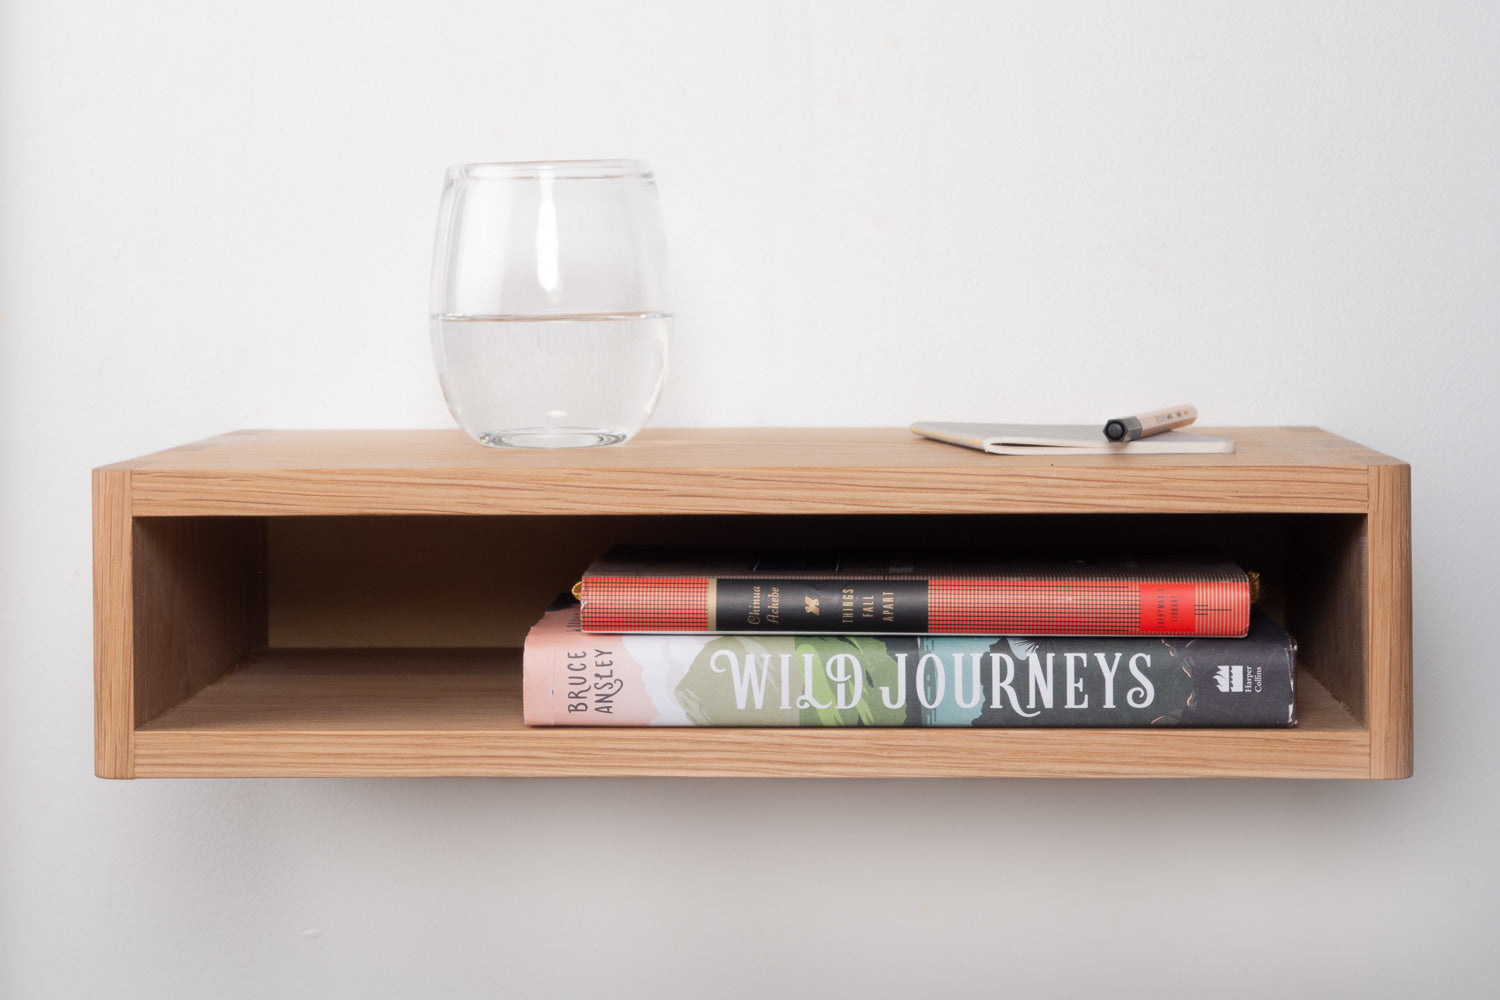 Mesa Bedside Shelf in White Oak pictured with a glass of water, notebook, pen and two books. Designed and made by Hey, Porter.